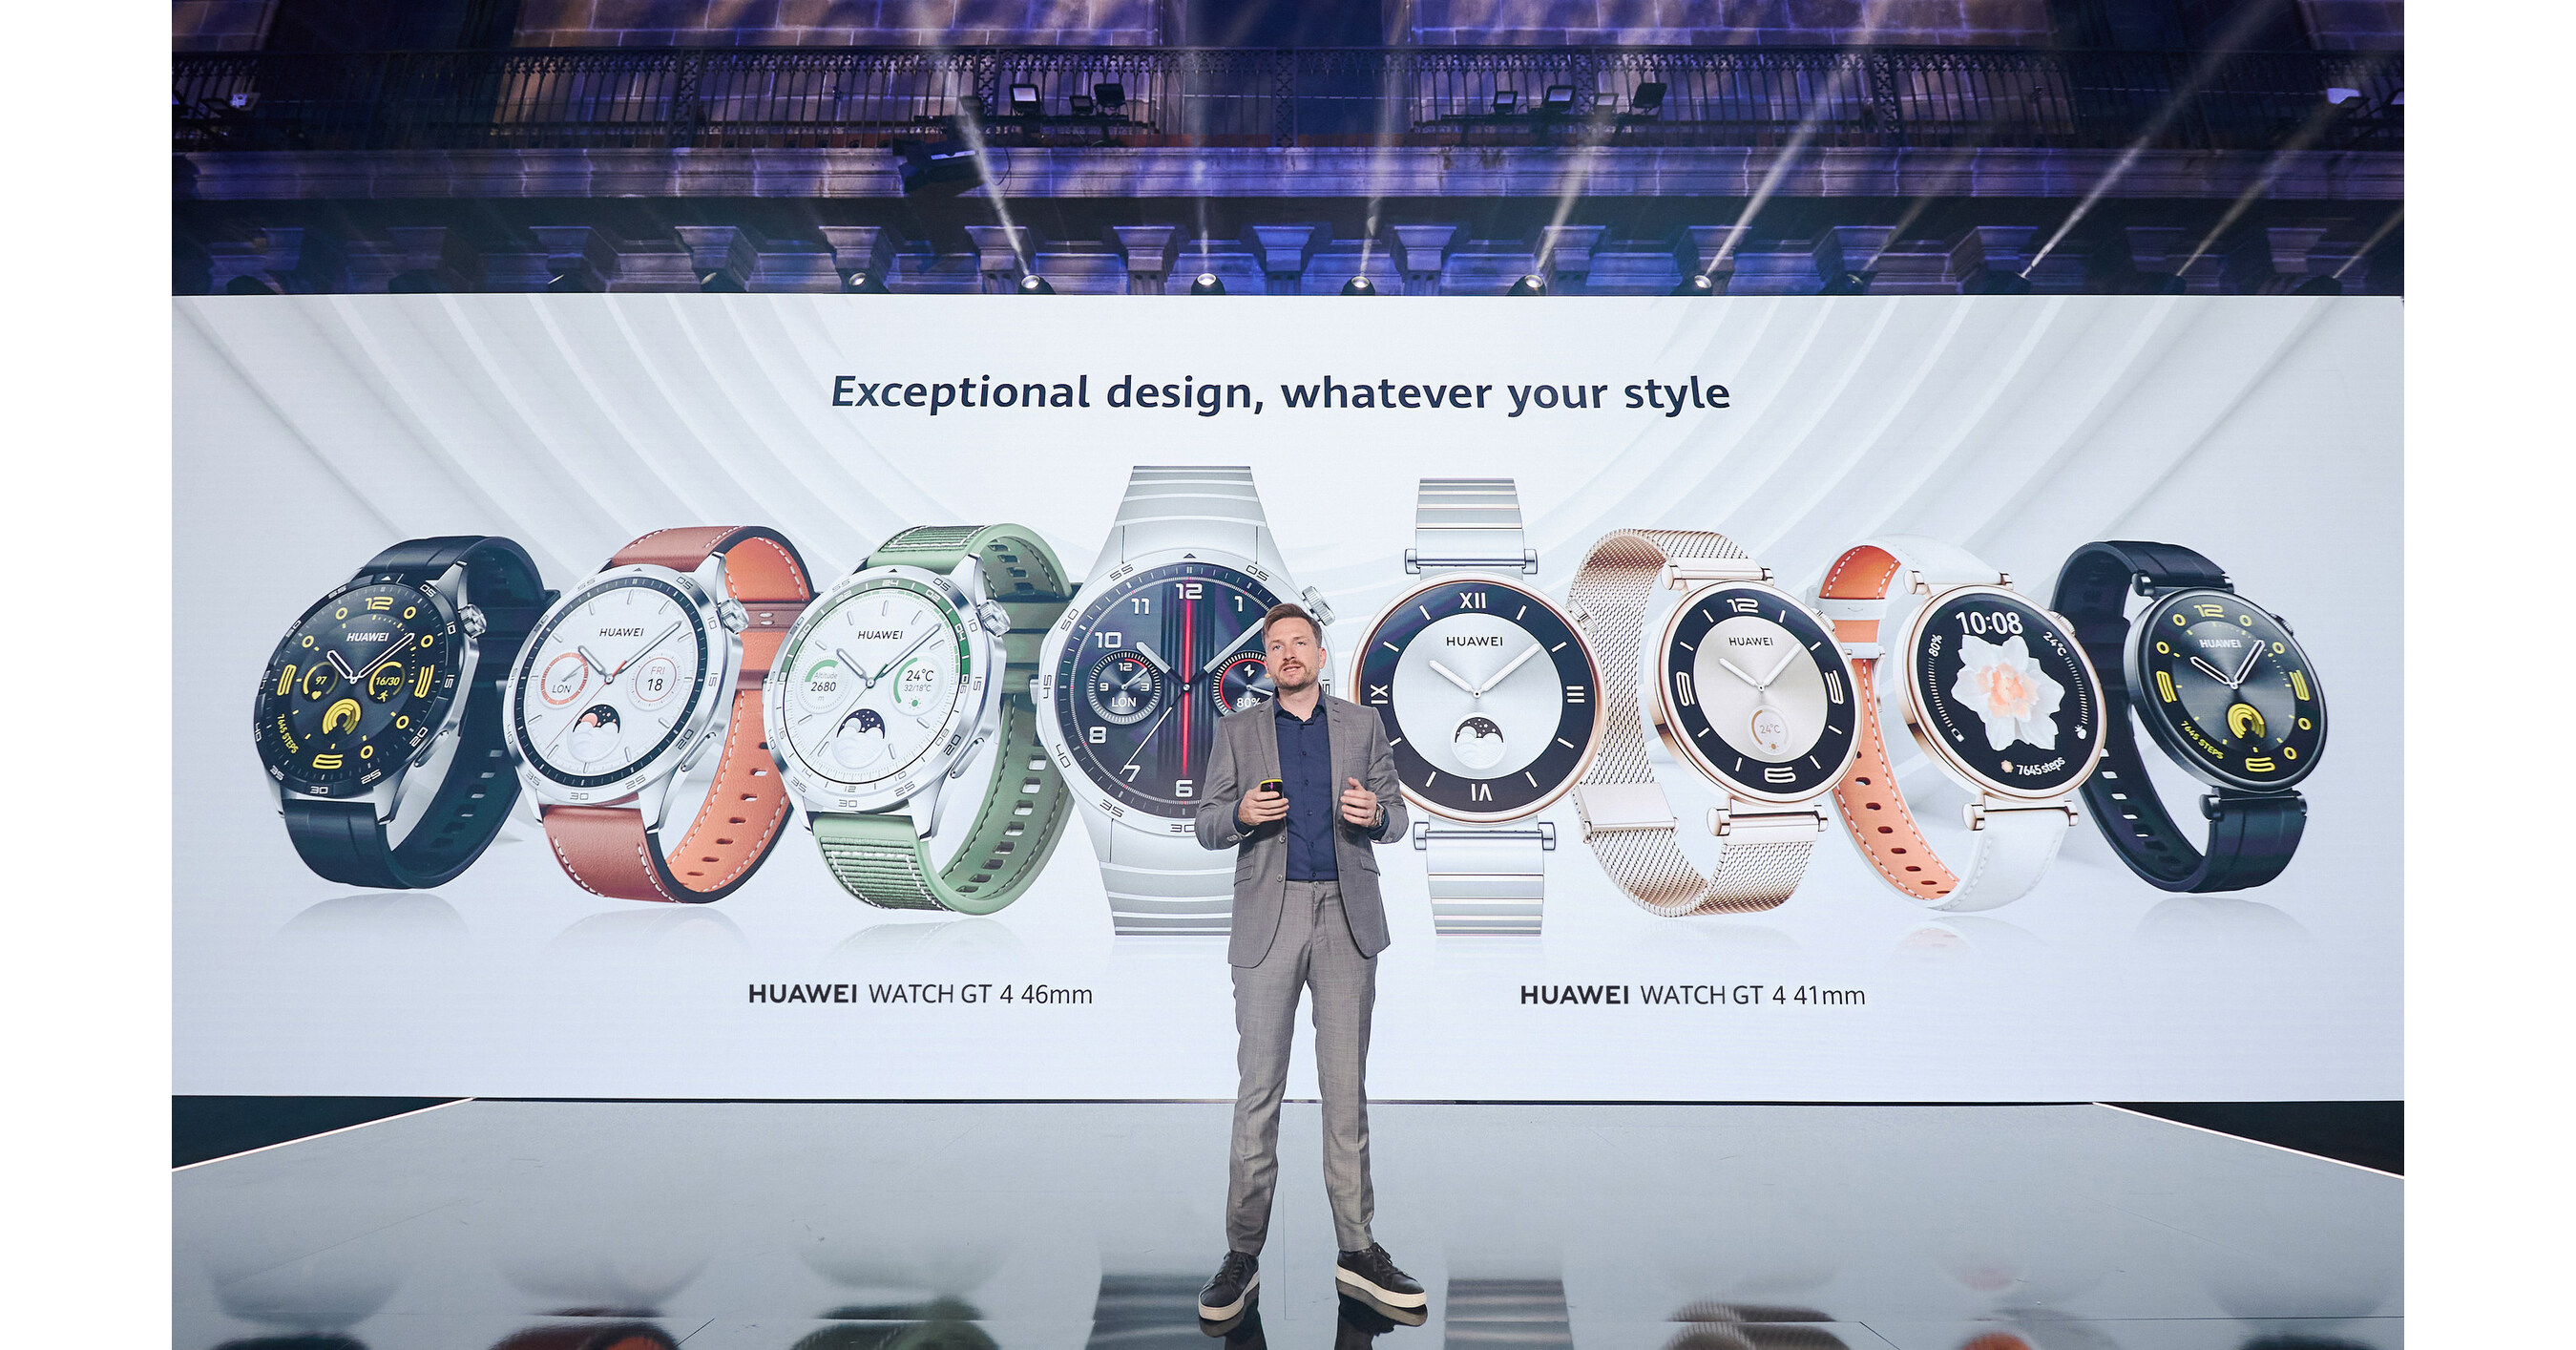 HUAWEI WATCH Ultimate & HUAWEI FreeBuds 5 are now available in the UAE